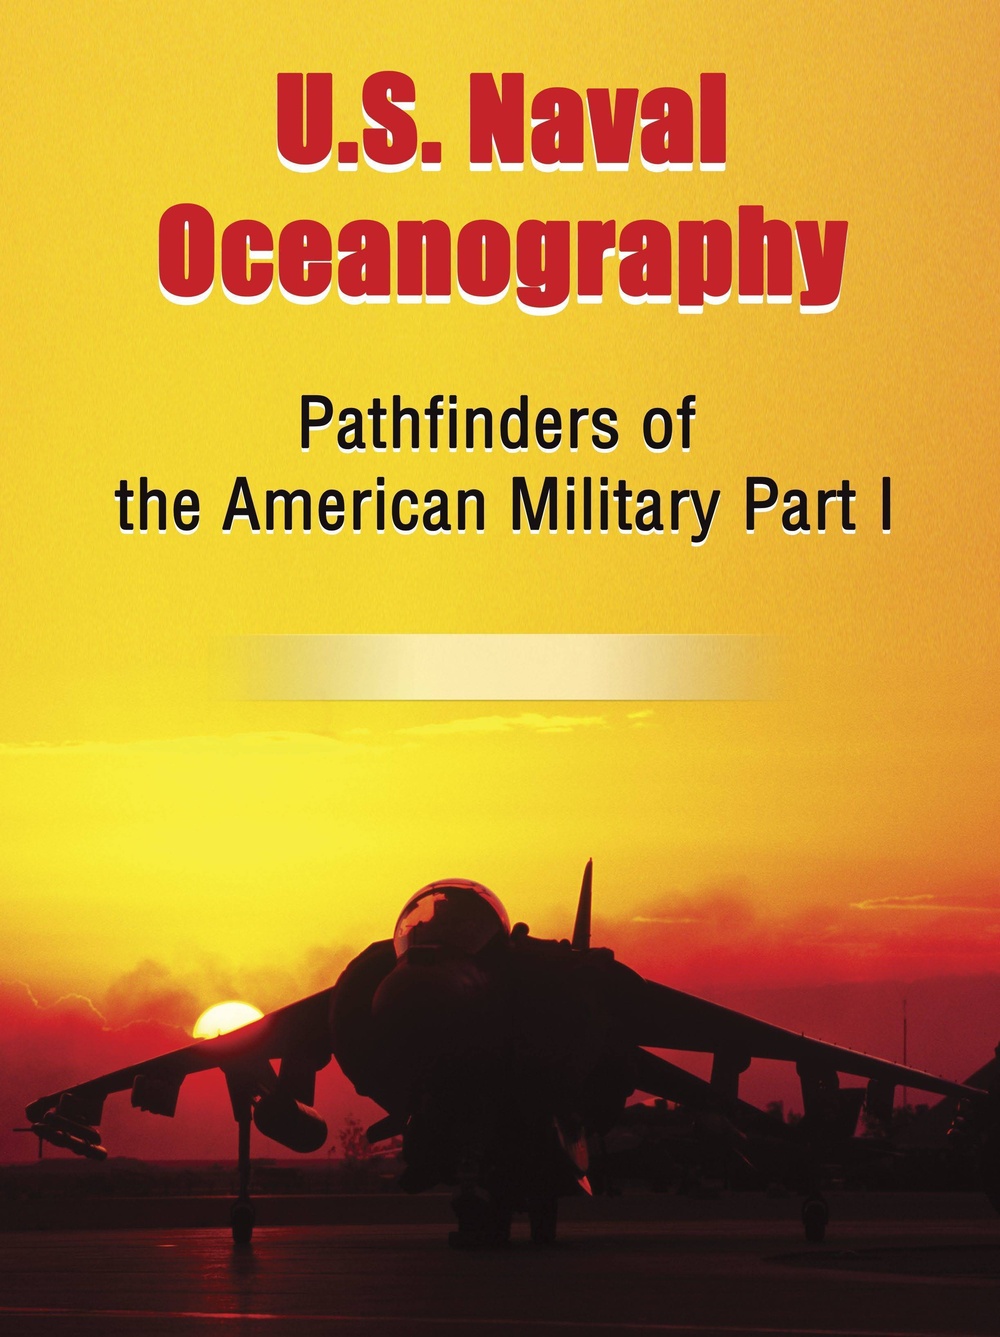 Naval Oceanography: Pathfinders of the American Military – Part 1